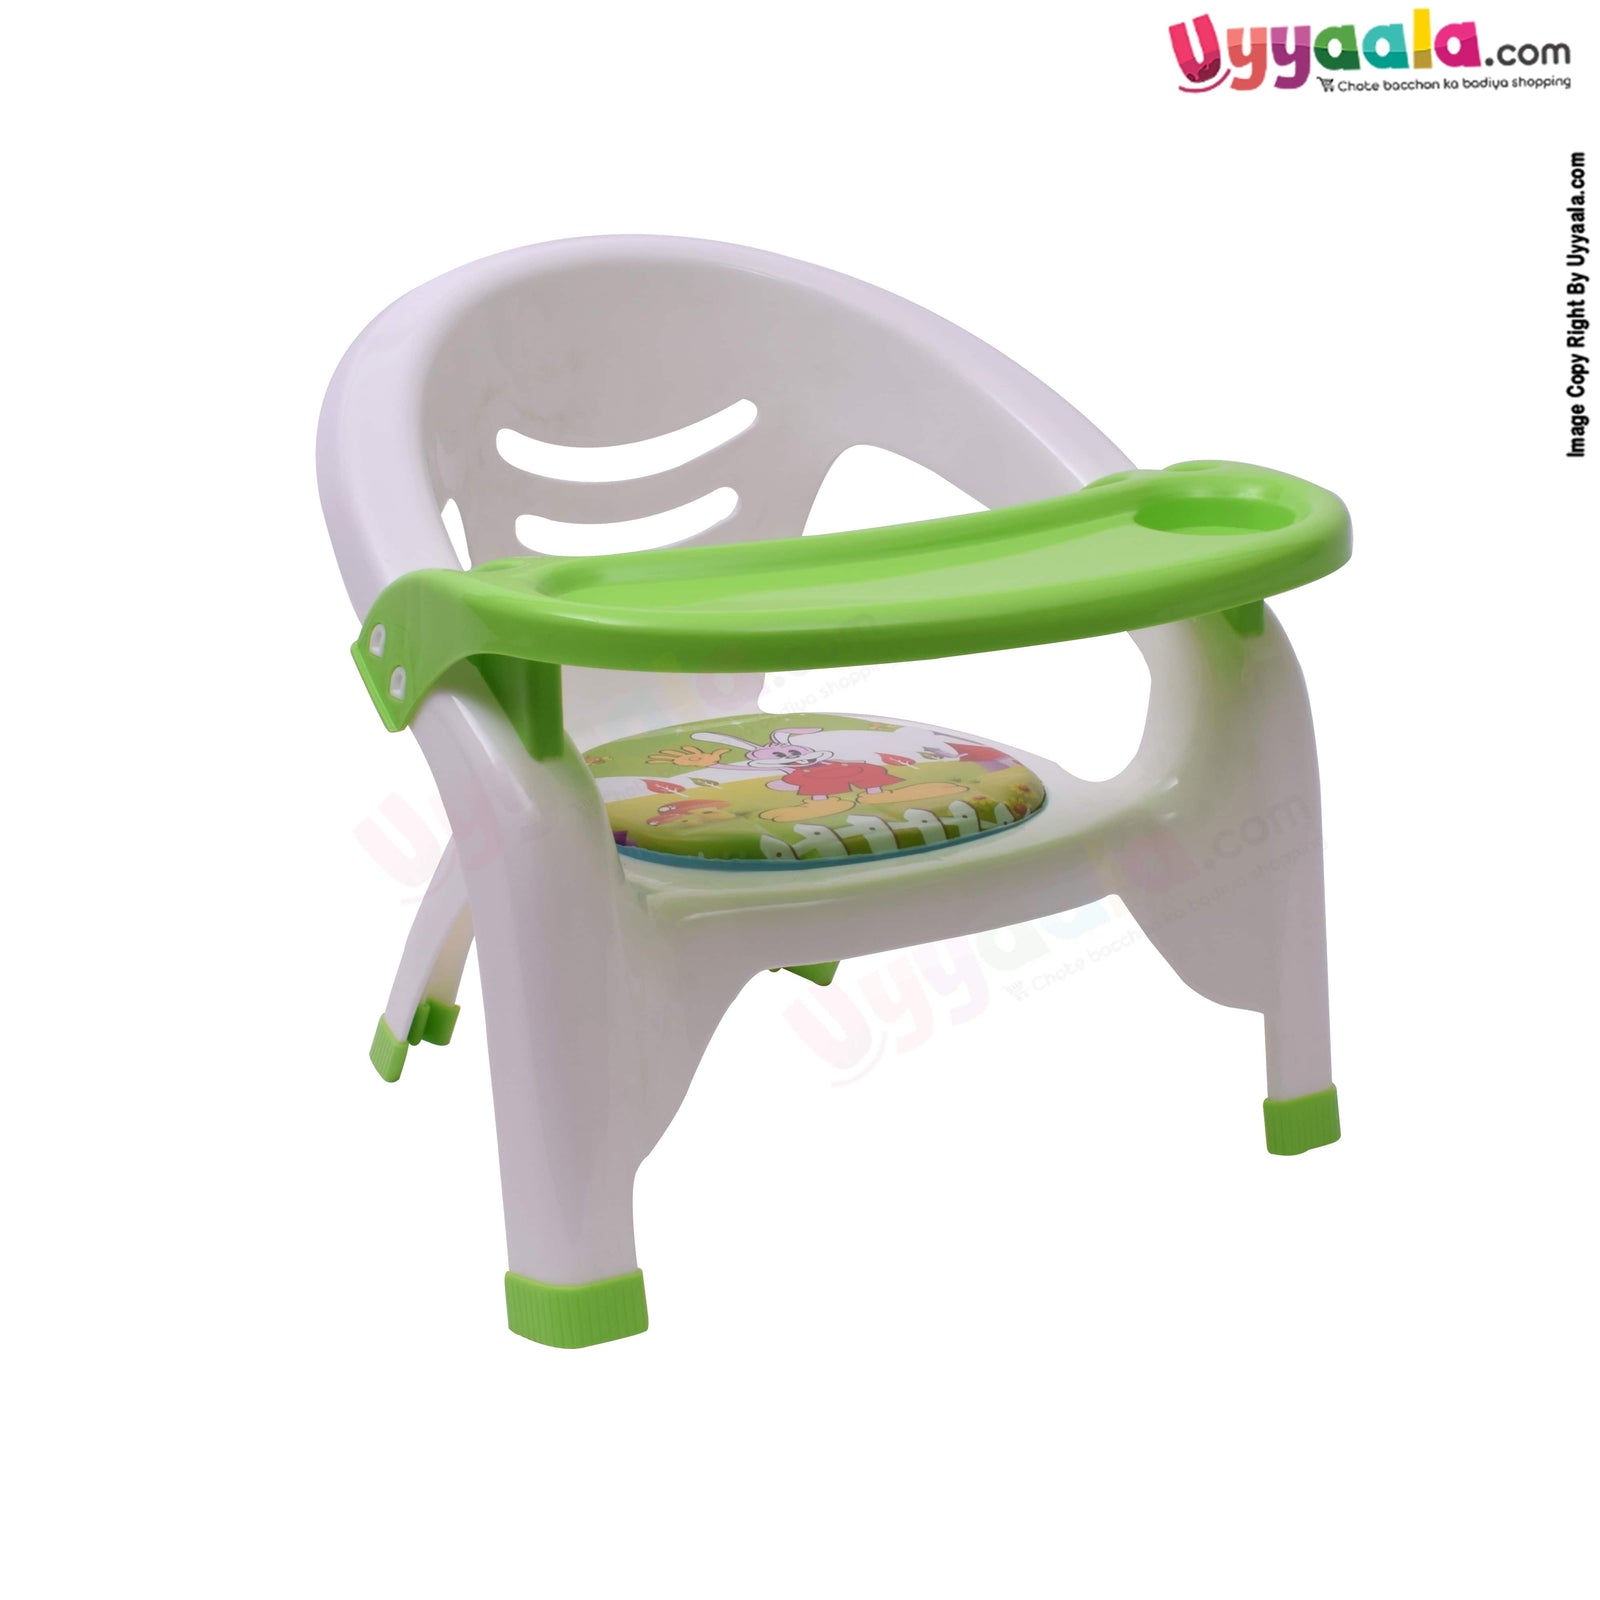 Durable Baby Feeding Chair with Tray in India - Green Color